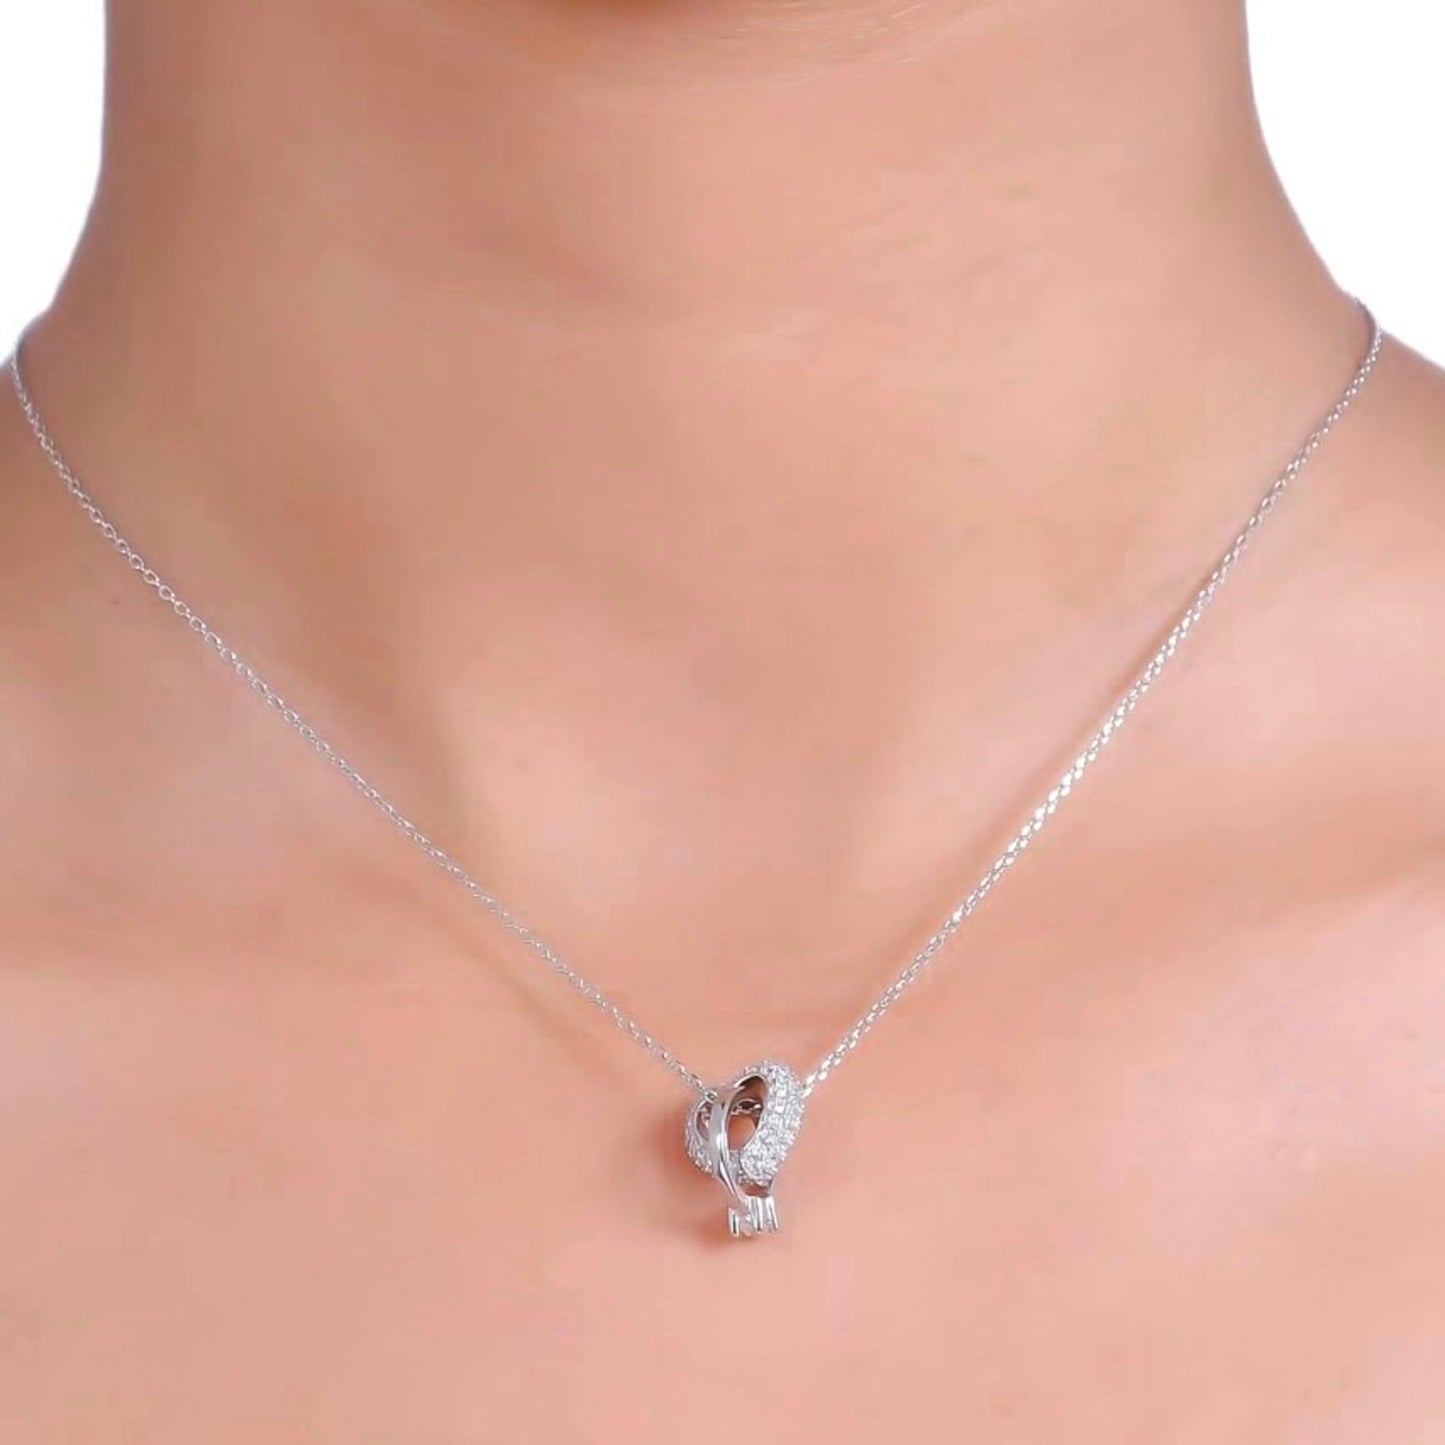 Solitaire ring with Zircon Heart Charm Chain Pendant